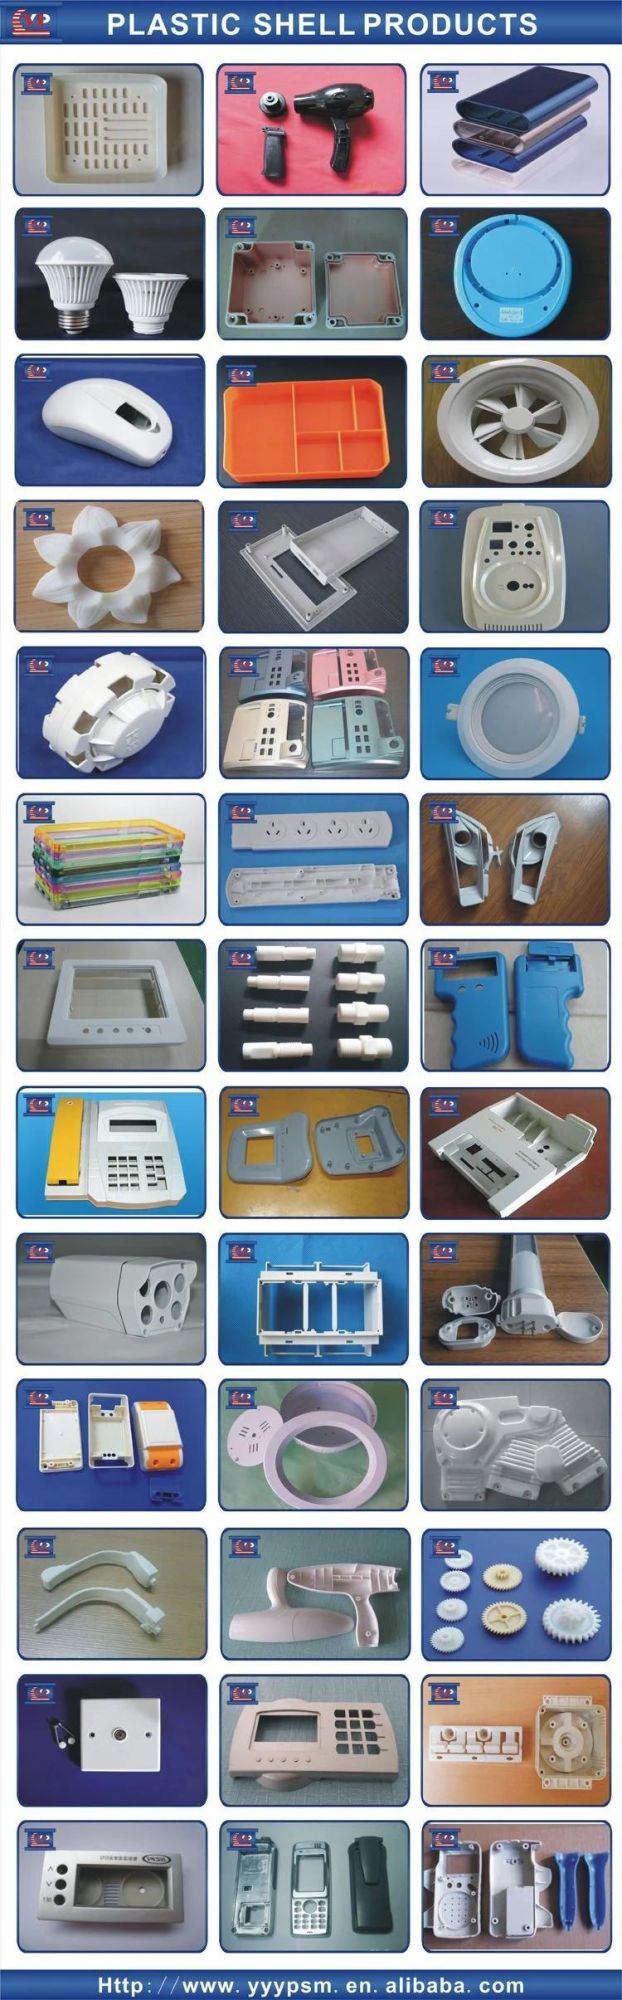 Mold Maker Plastic Injection Water Purifier Bottle Wrench Mould